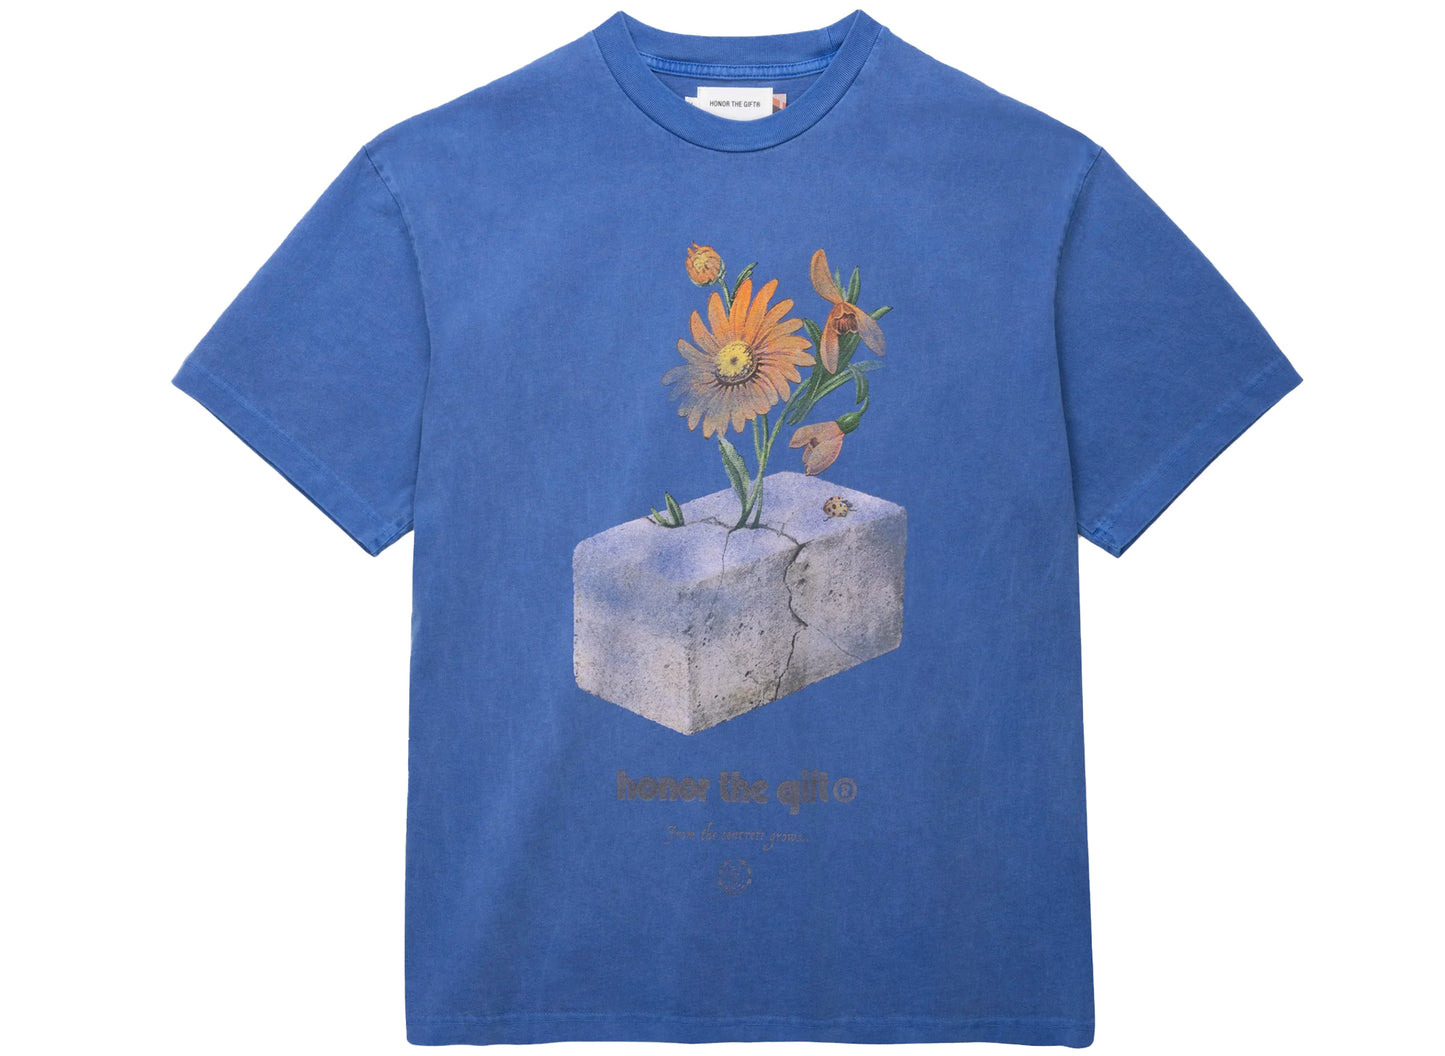 Honor the Gift Concrete 2.0 S/S Tee in Blue